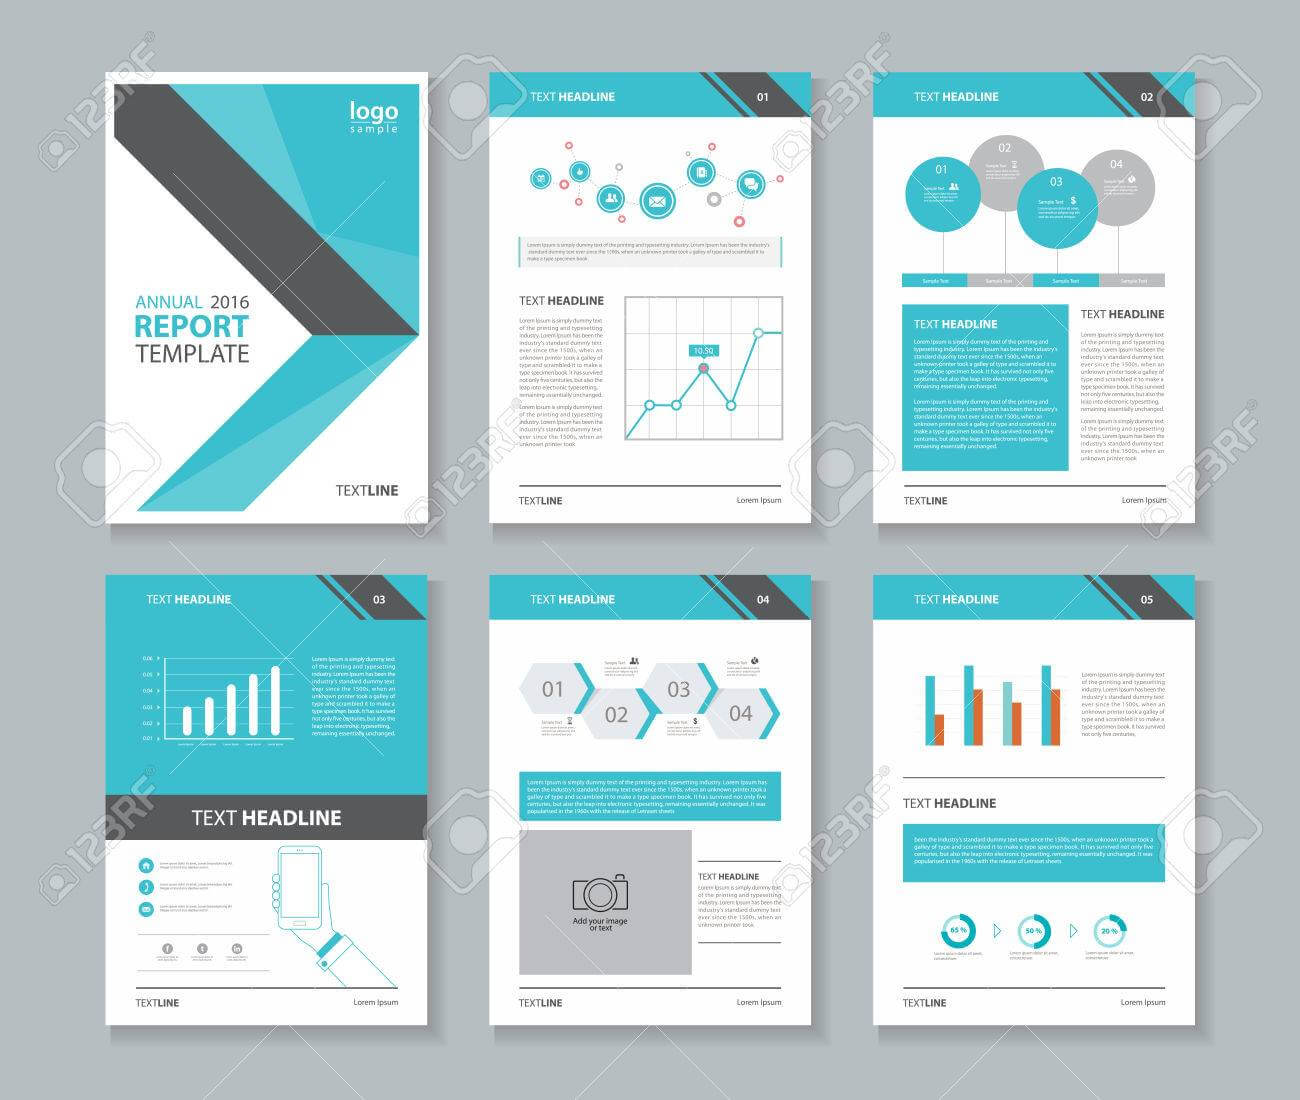 001 Template Ideas Annual Report Layout Frightening Free Regarding Word Annual Report Template